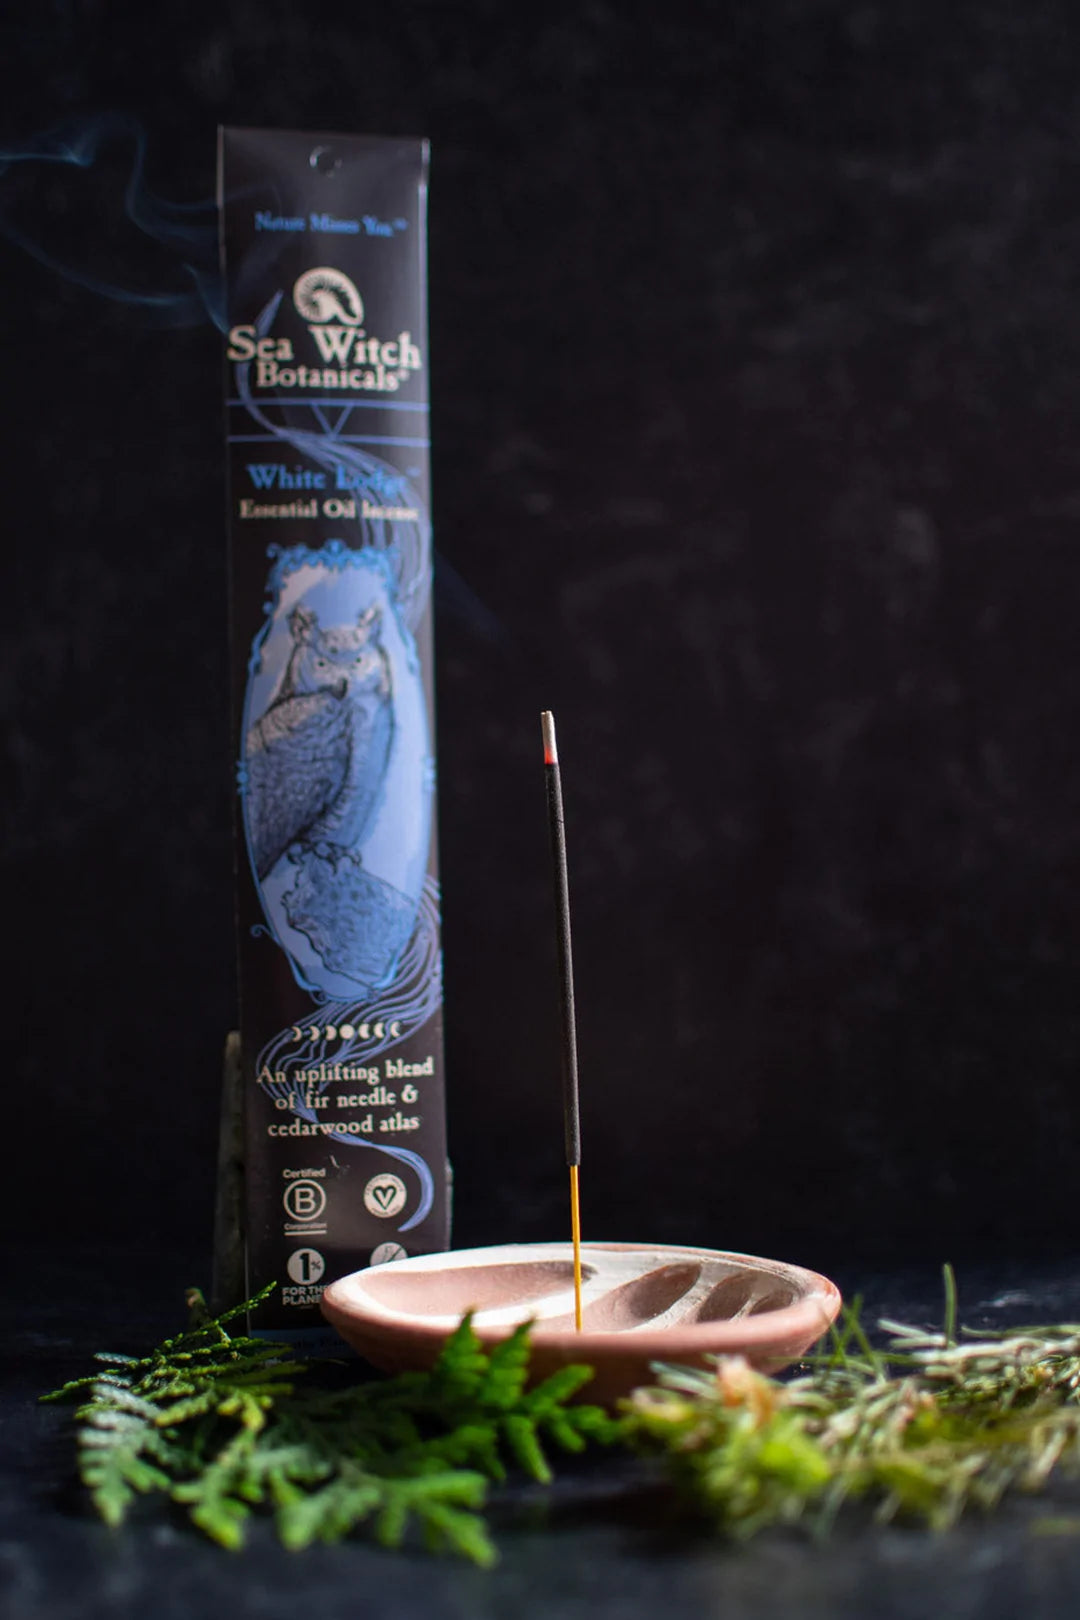 White Lodge Incense: With All-natural Cedarwood Atlas &amp; Fir Needle Essential Oils